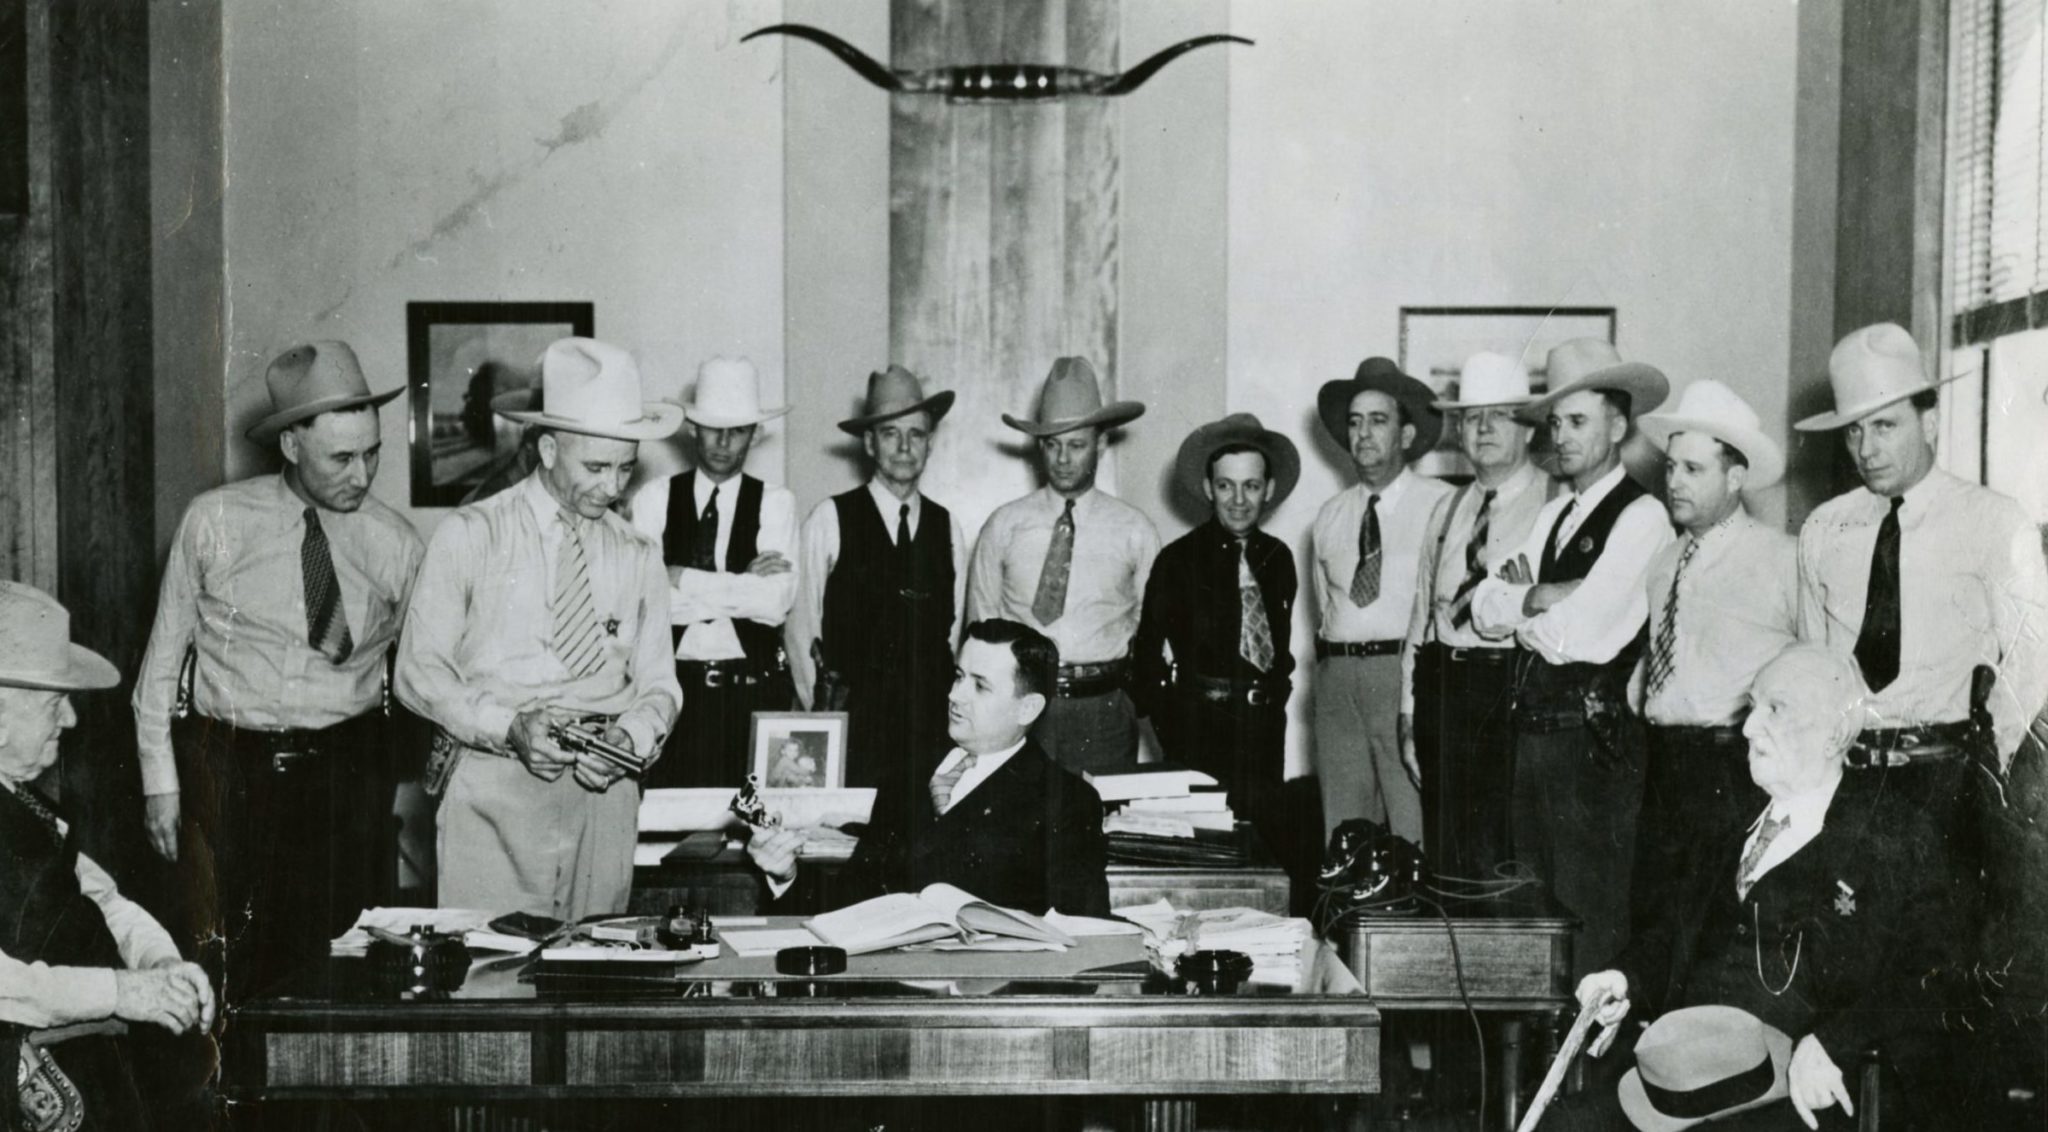 A group of Texas Rangers in Governor Allred's Office in 1935